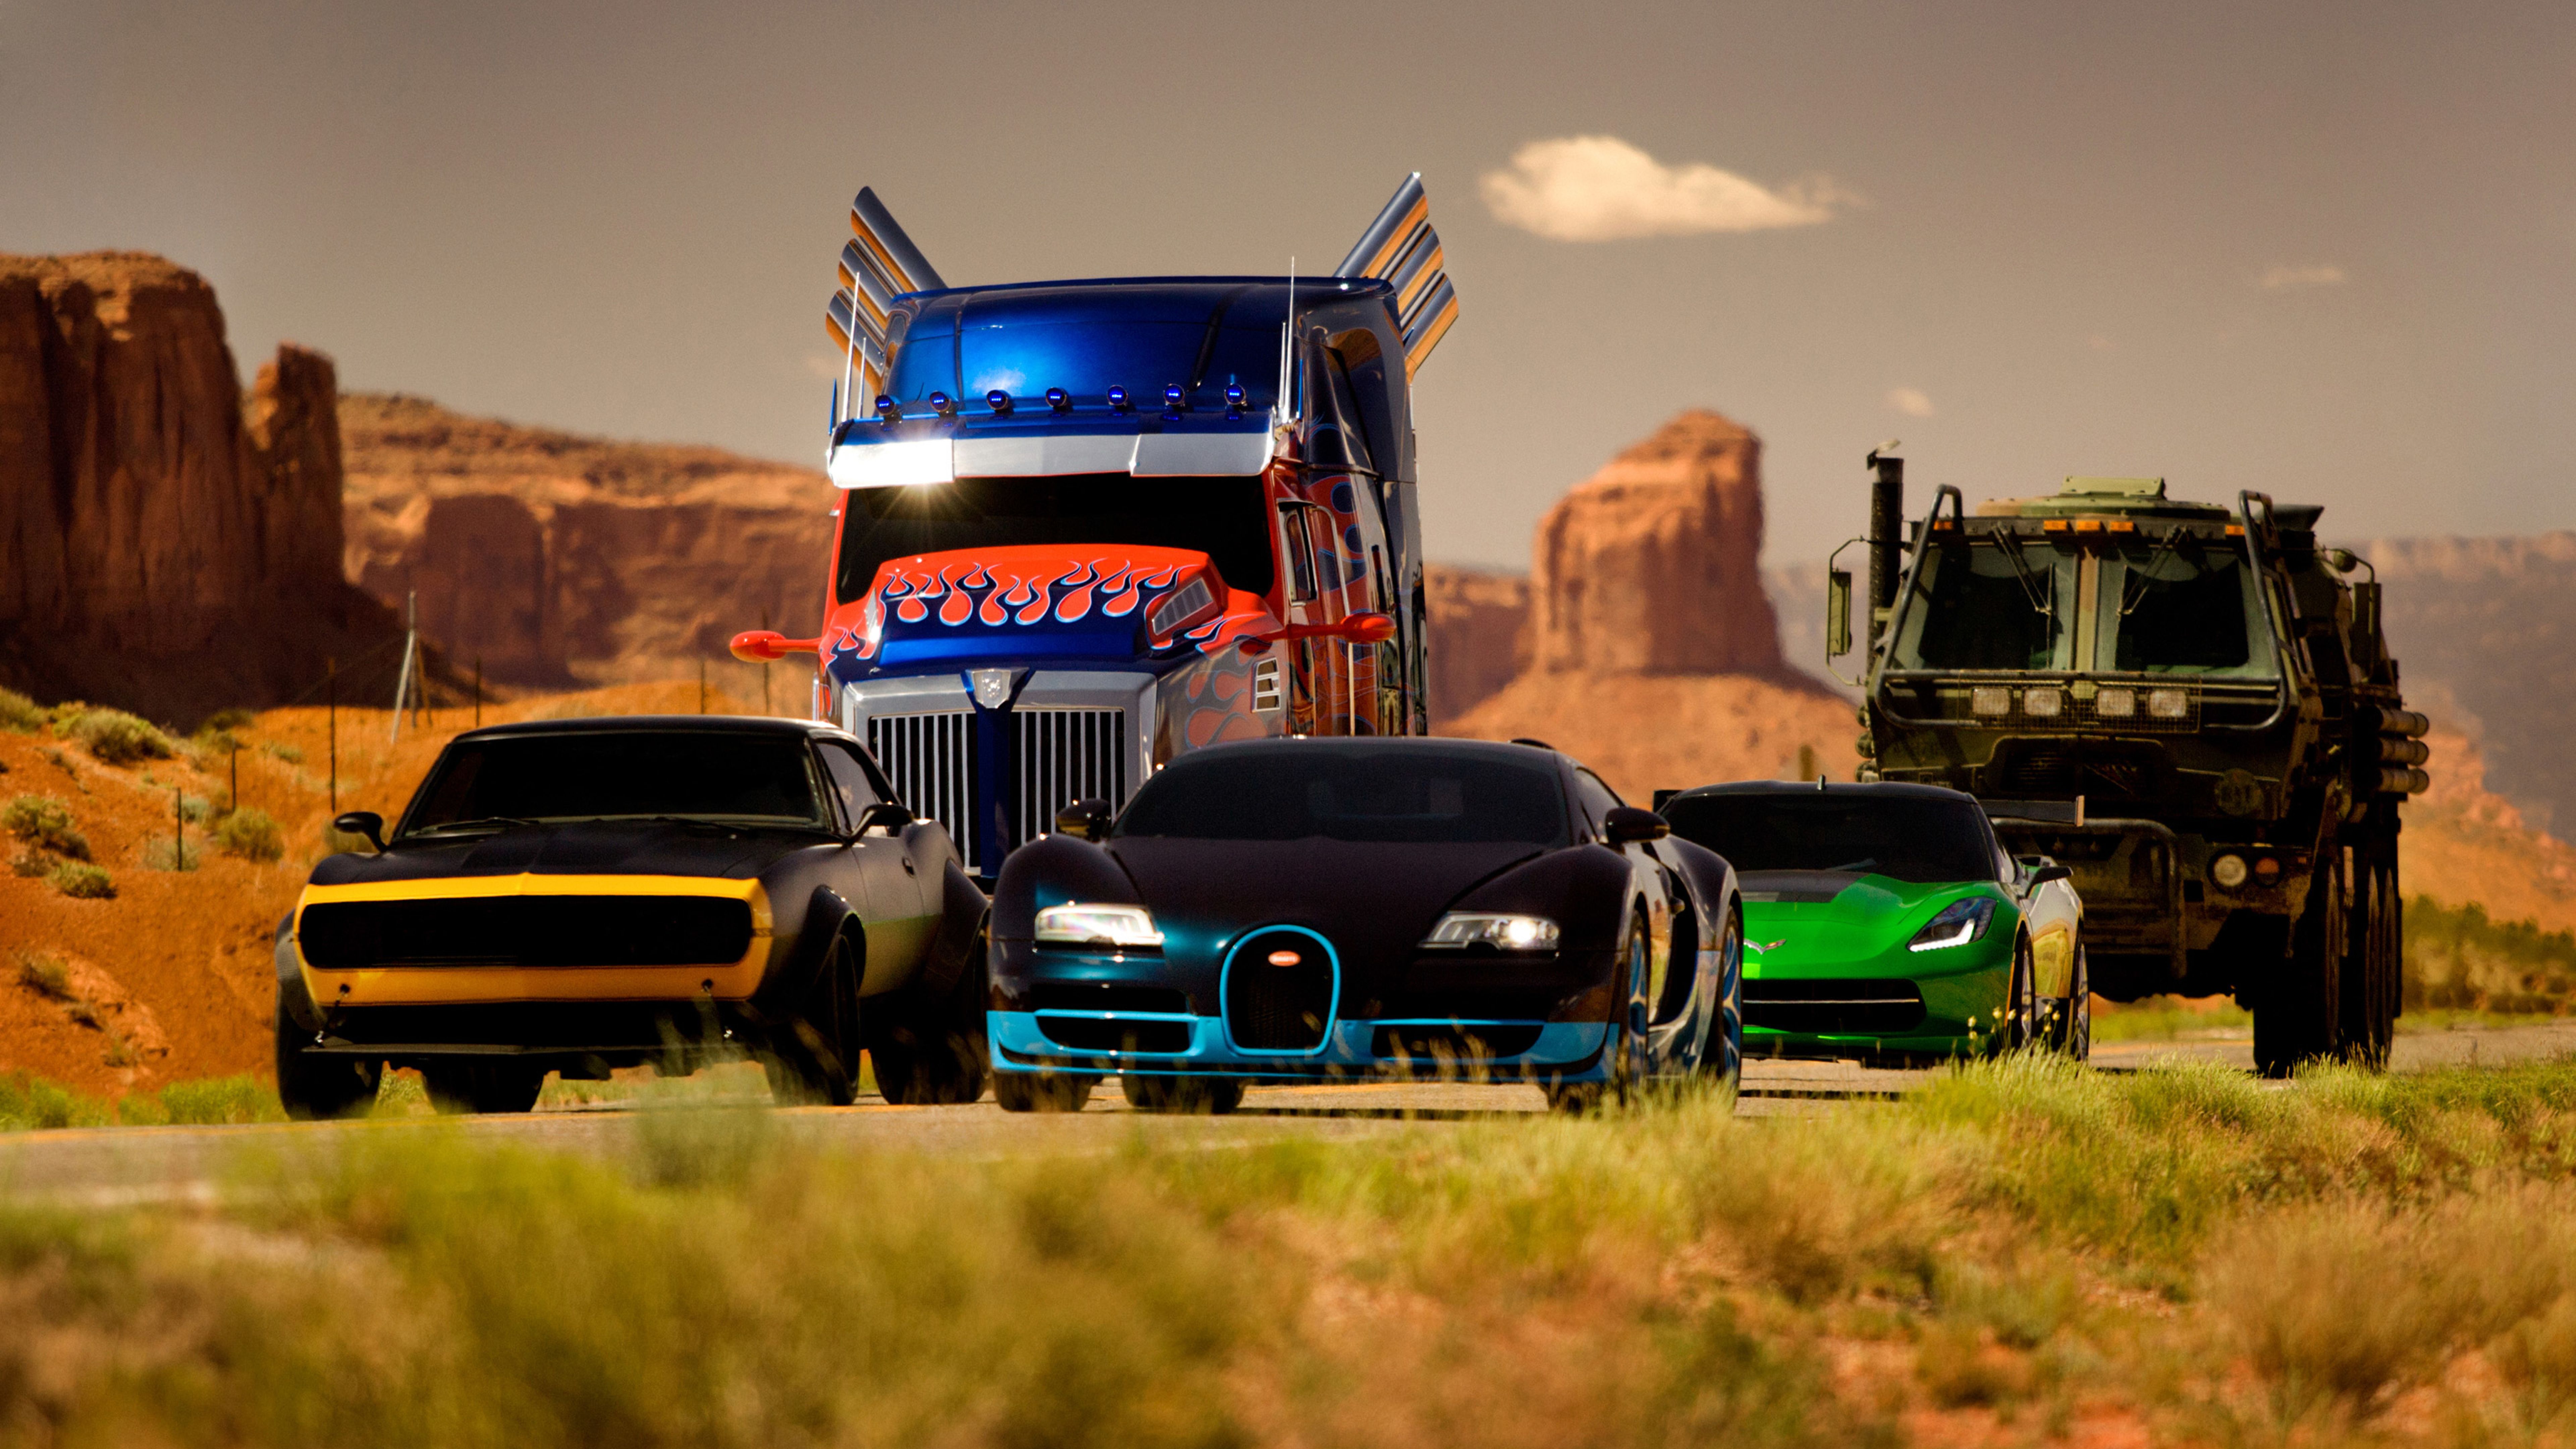 transformers images hd